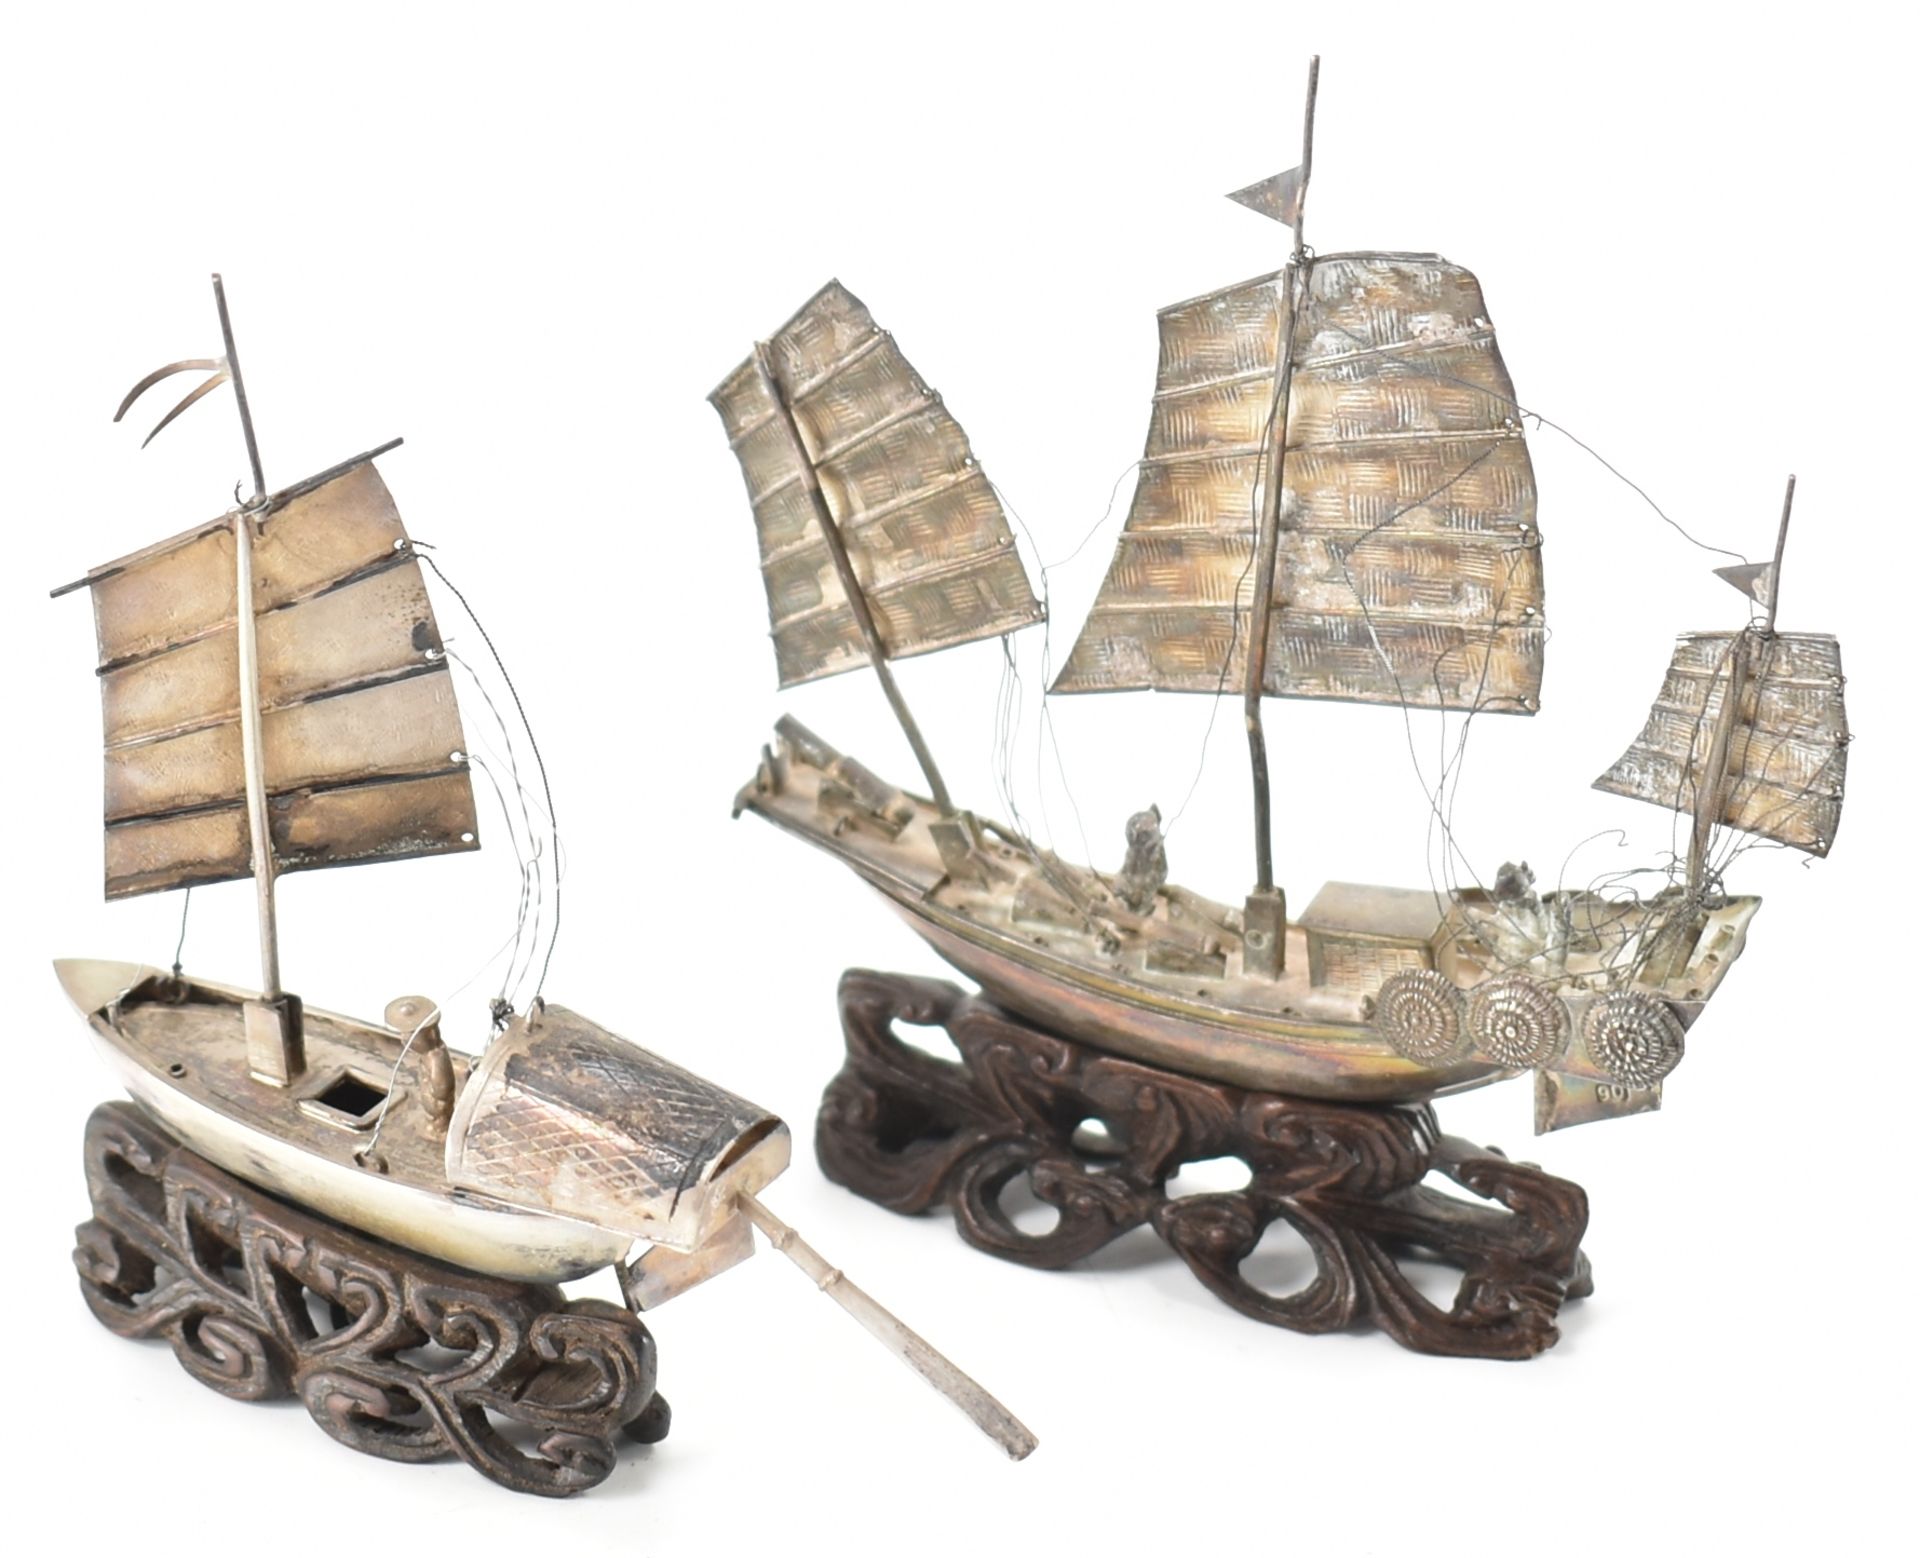 PAIR OF CHINESE SILVER JUNK SHIP FIGURINES - Image 2 of 4